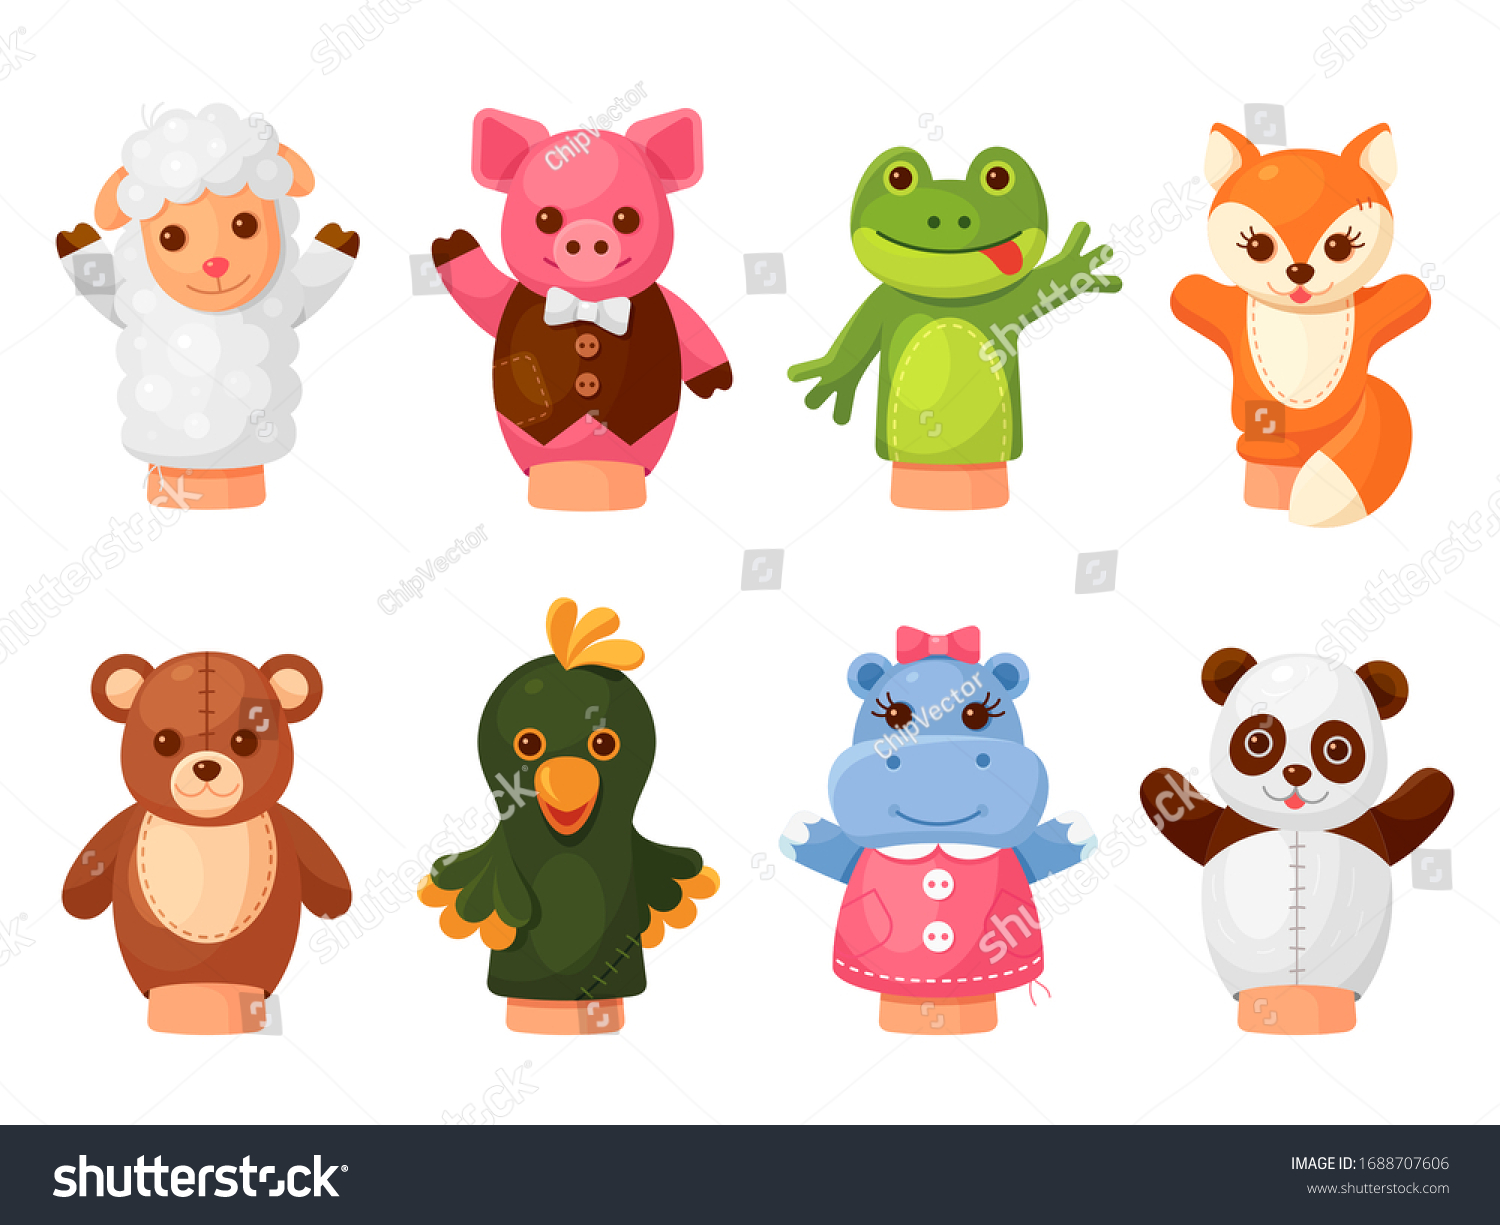 Hands Puppets Set Animal Friends Play Stock Vector Royalty Free